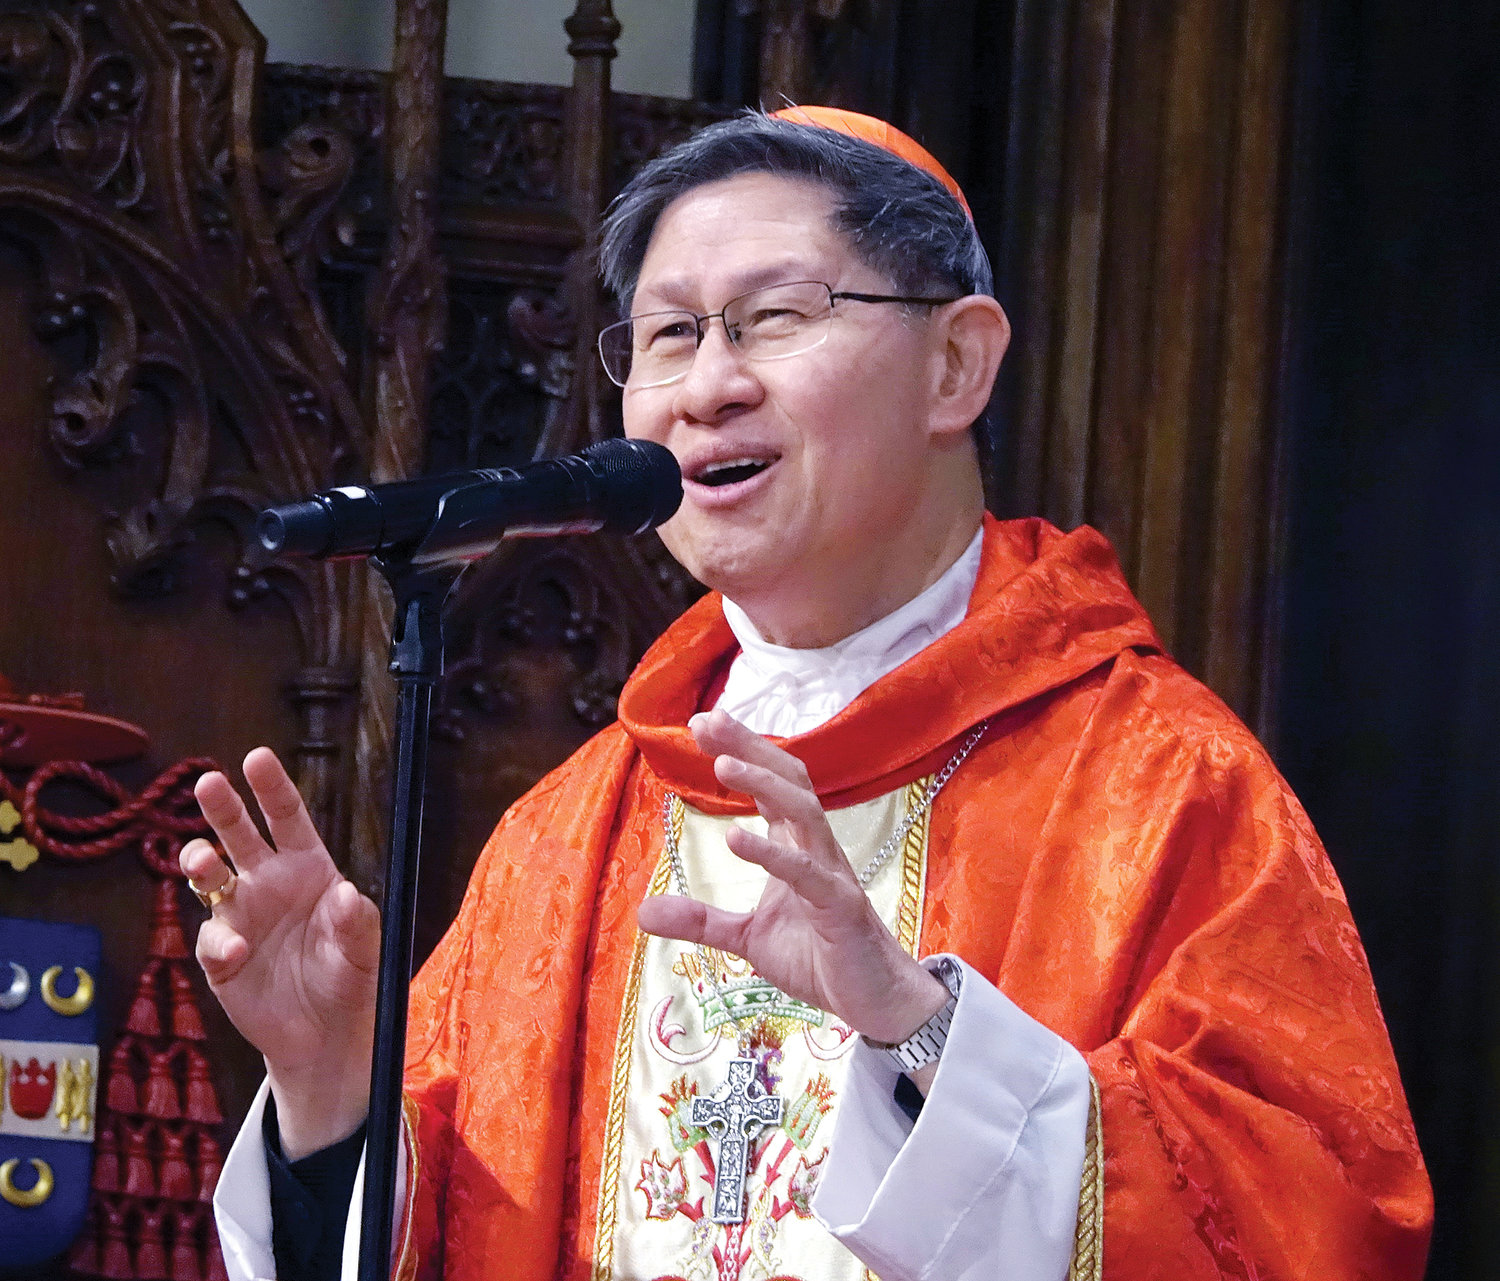 Cardinal Luis Antonio Tagle celebrates a Solemn Pontifical Mass June 1 at St. Patrick’s Cathedral to mark the 40th anniversary of the San Lorenzo Ruiz movement in the United States and the closing of the 500th anniversary of Christianity in the Philippines.